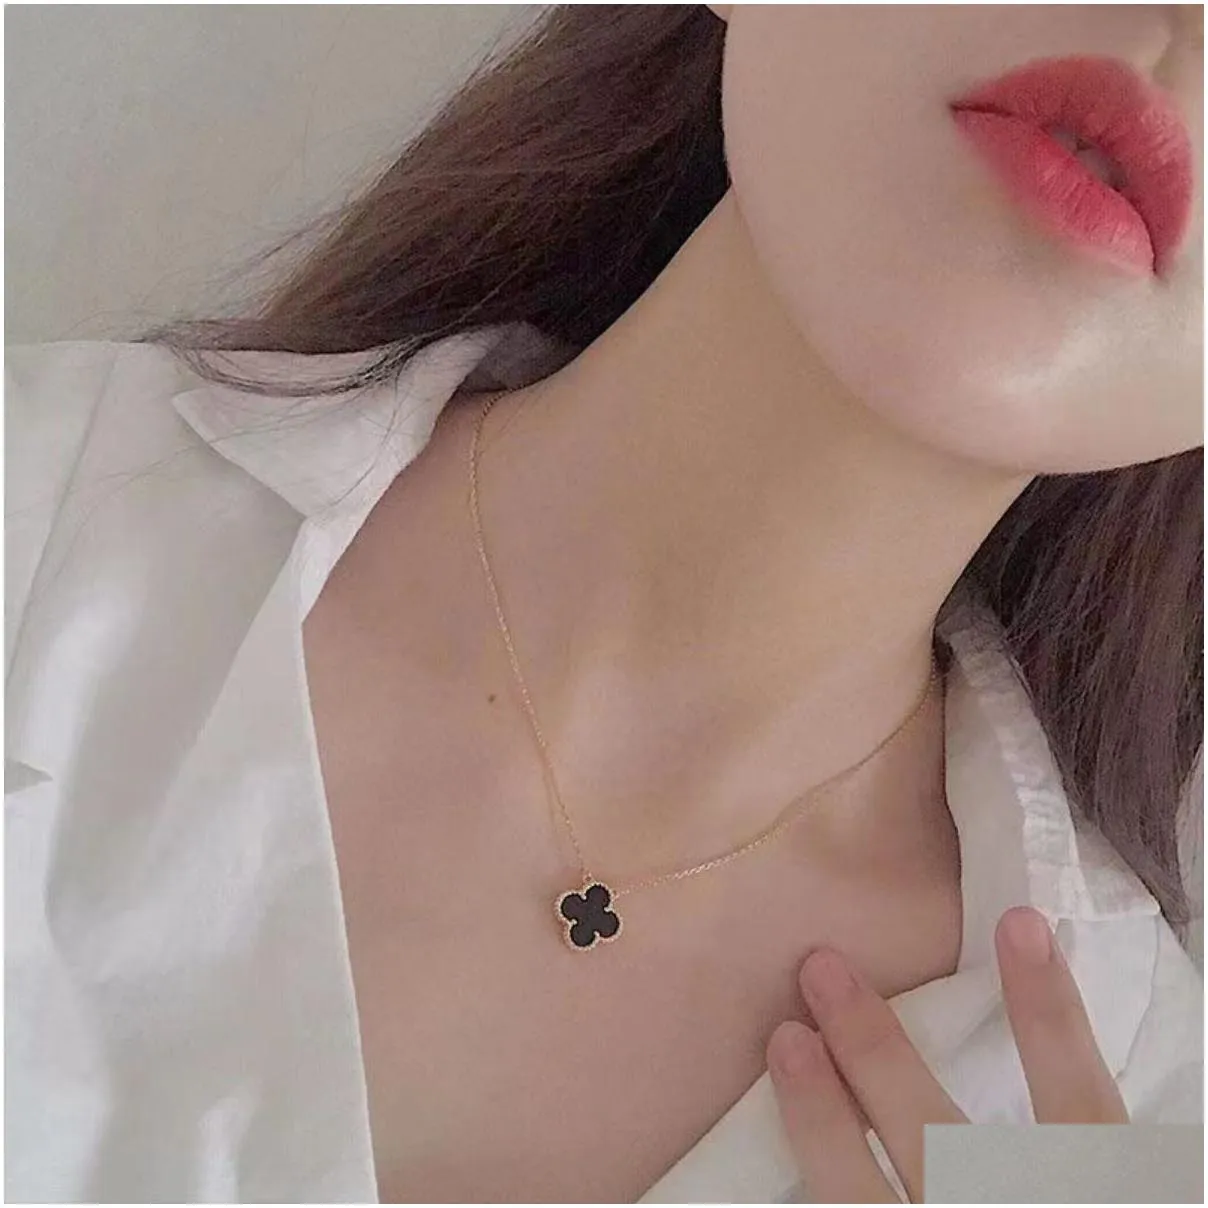 2023 van clover necklace fashion flowers four-leaf clover cleef womens luxury designer necklaces jewelry